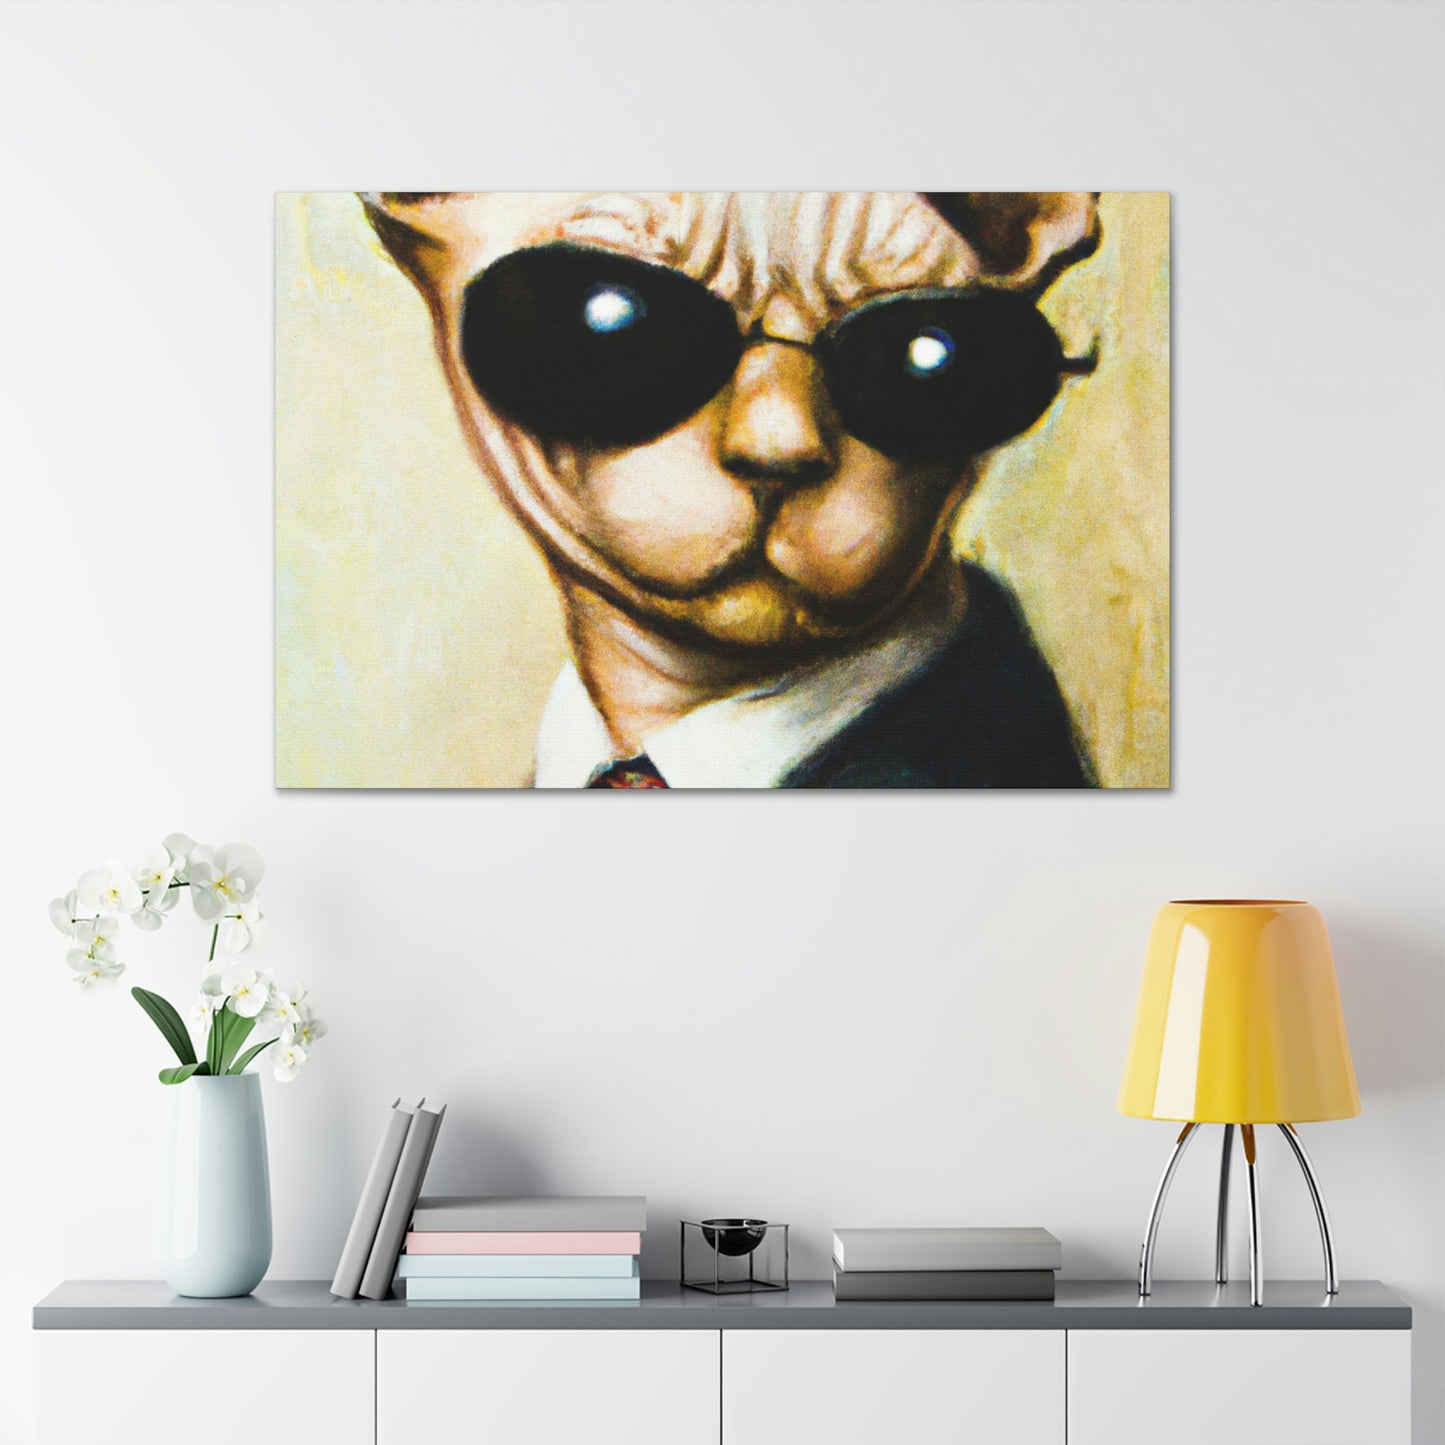 Sparky Snoozy - Cat Lovers Canvas Wall Art